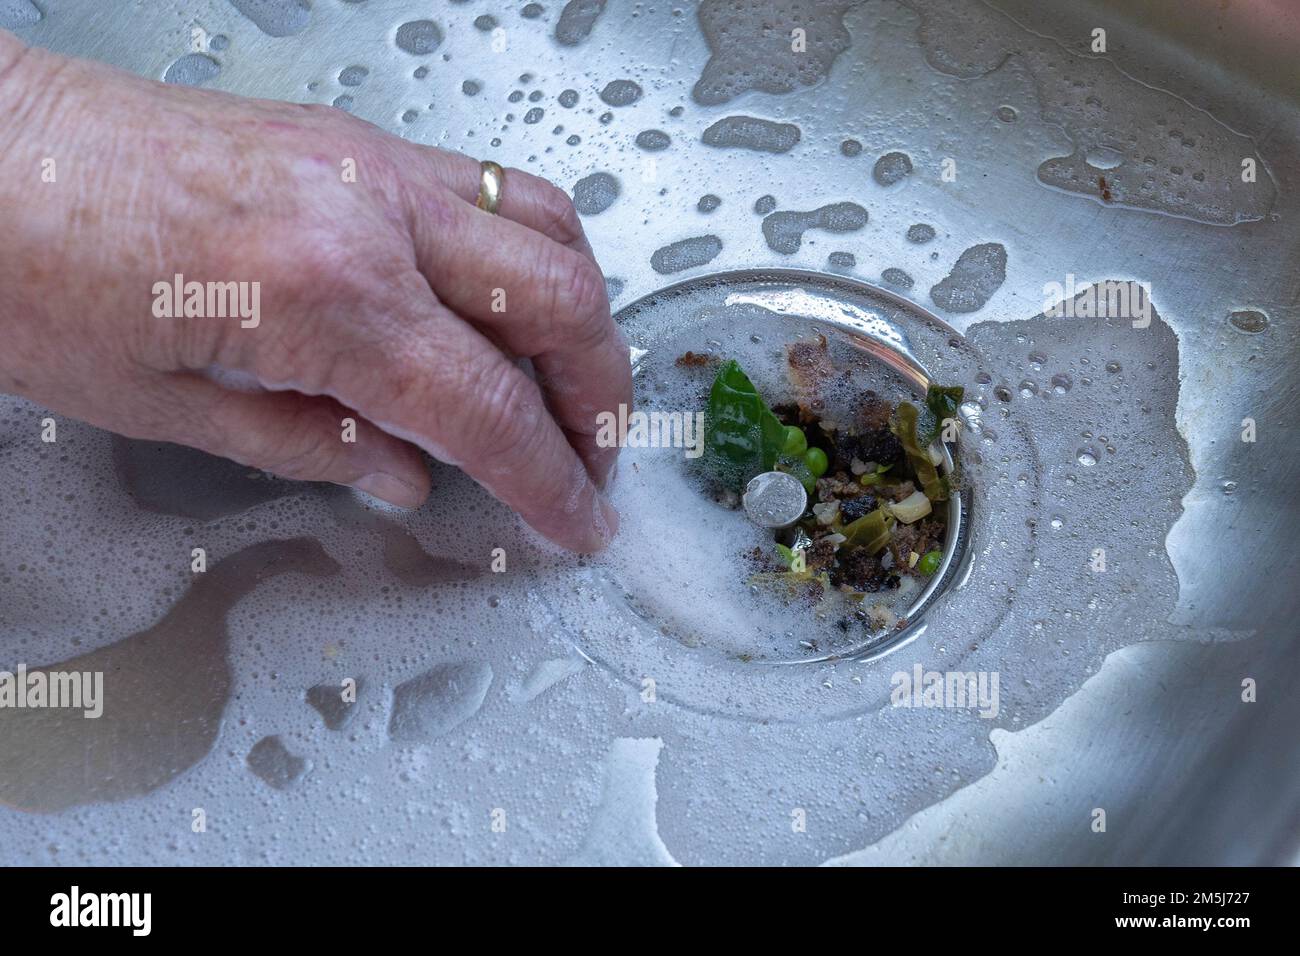 Female hand collecting bits of food from sink hole strainer with suds in stainless sink Stock Photo